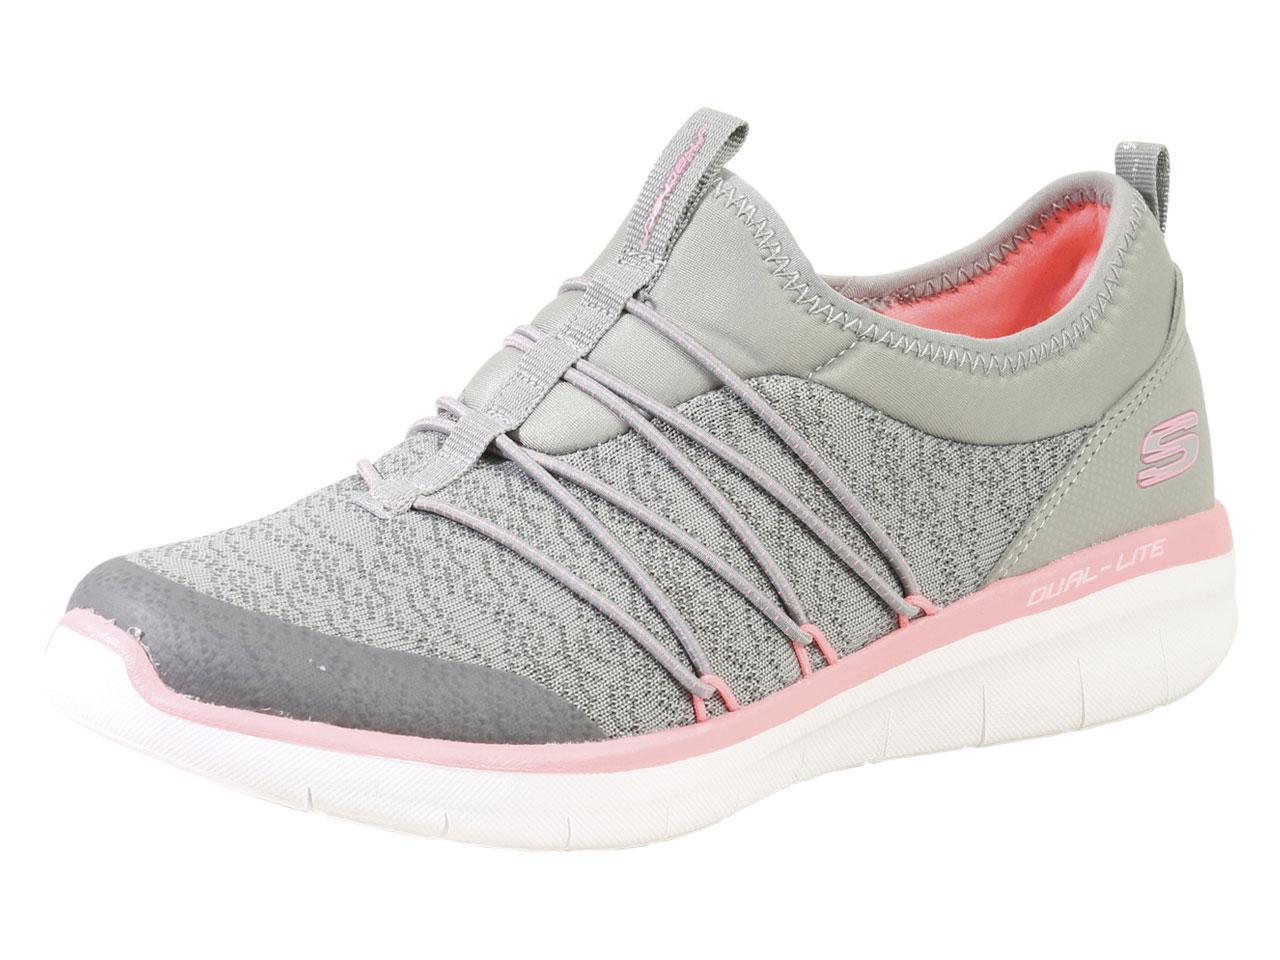 Skechers Women's Synergy 2.0 Simply Chic Memory Foam Sneakers Shoes - Gray/Pink - 7.5 B(M) US